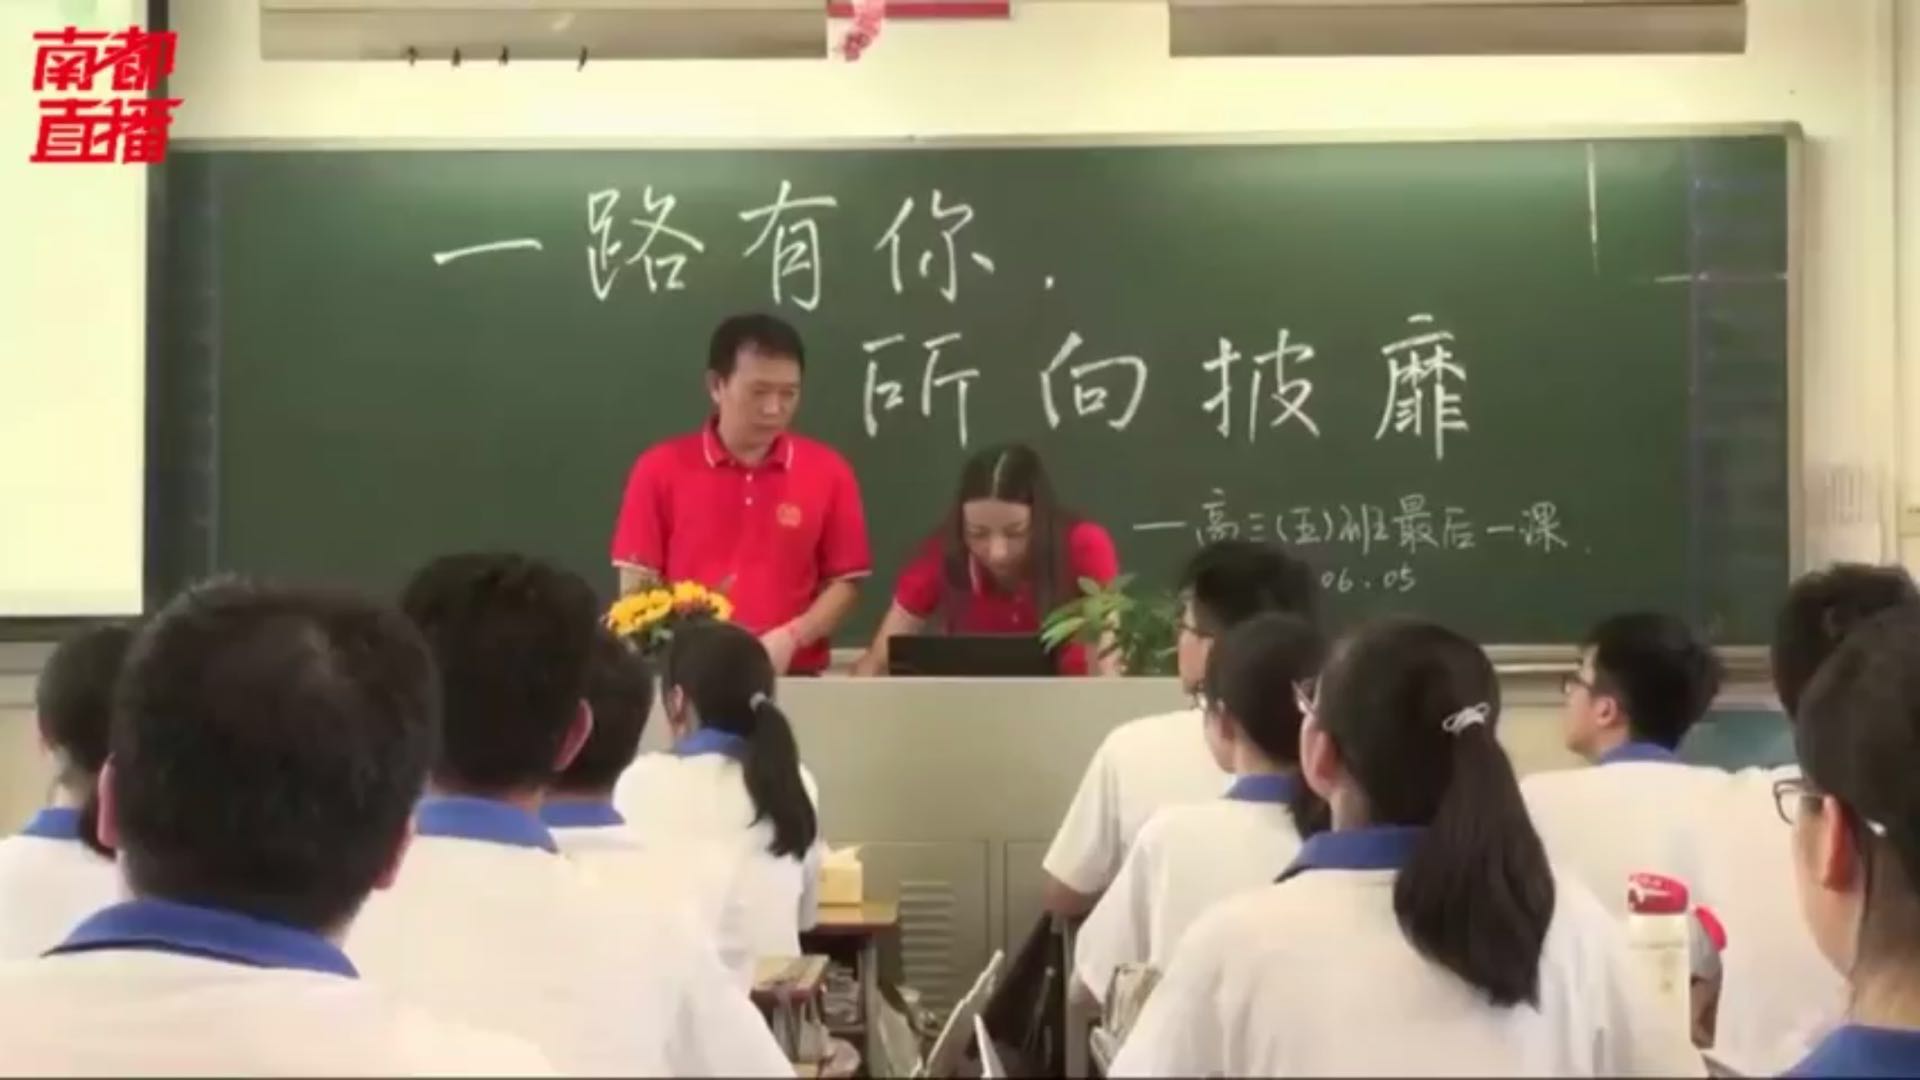 30 Absolutely Insane Questions from China's Gaokao